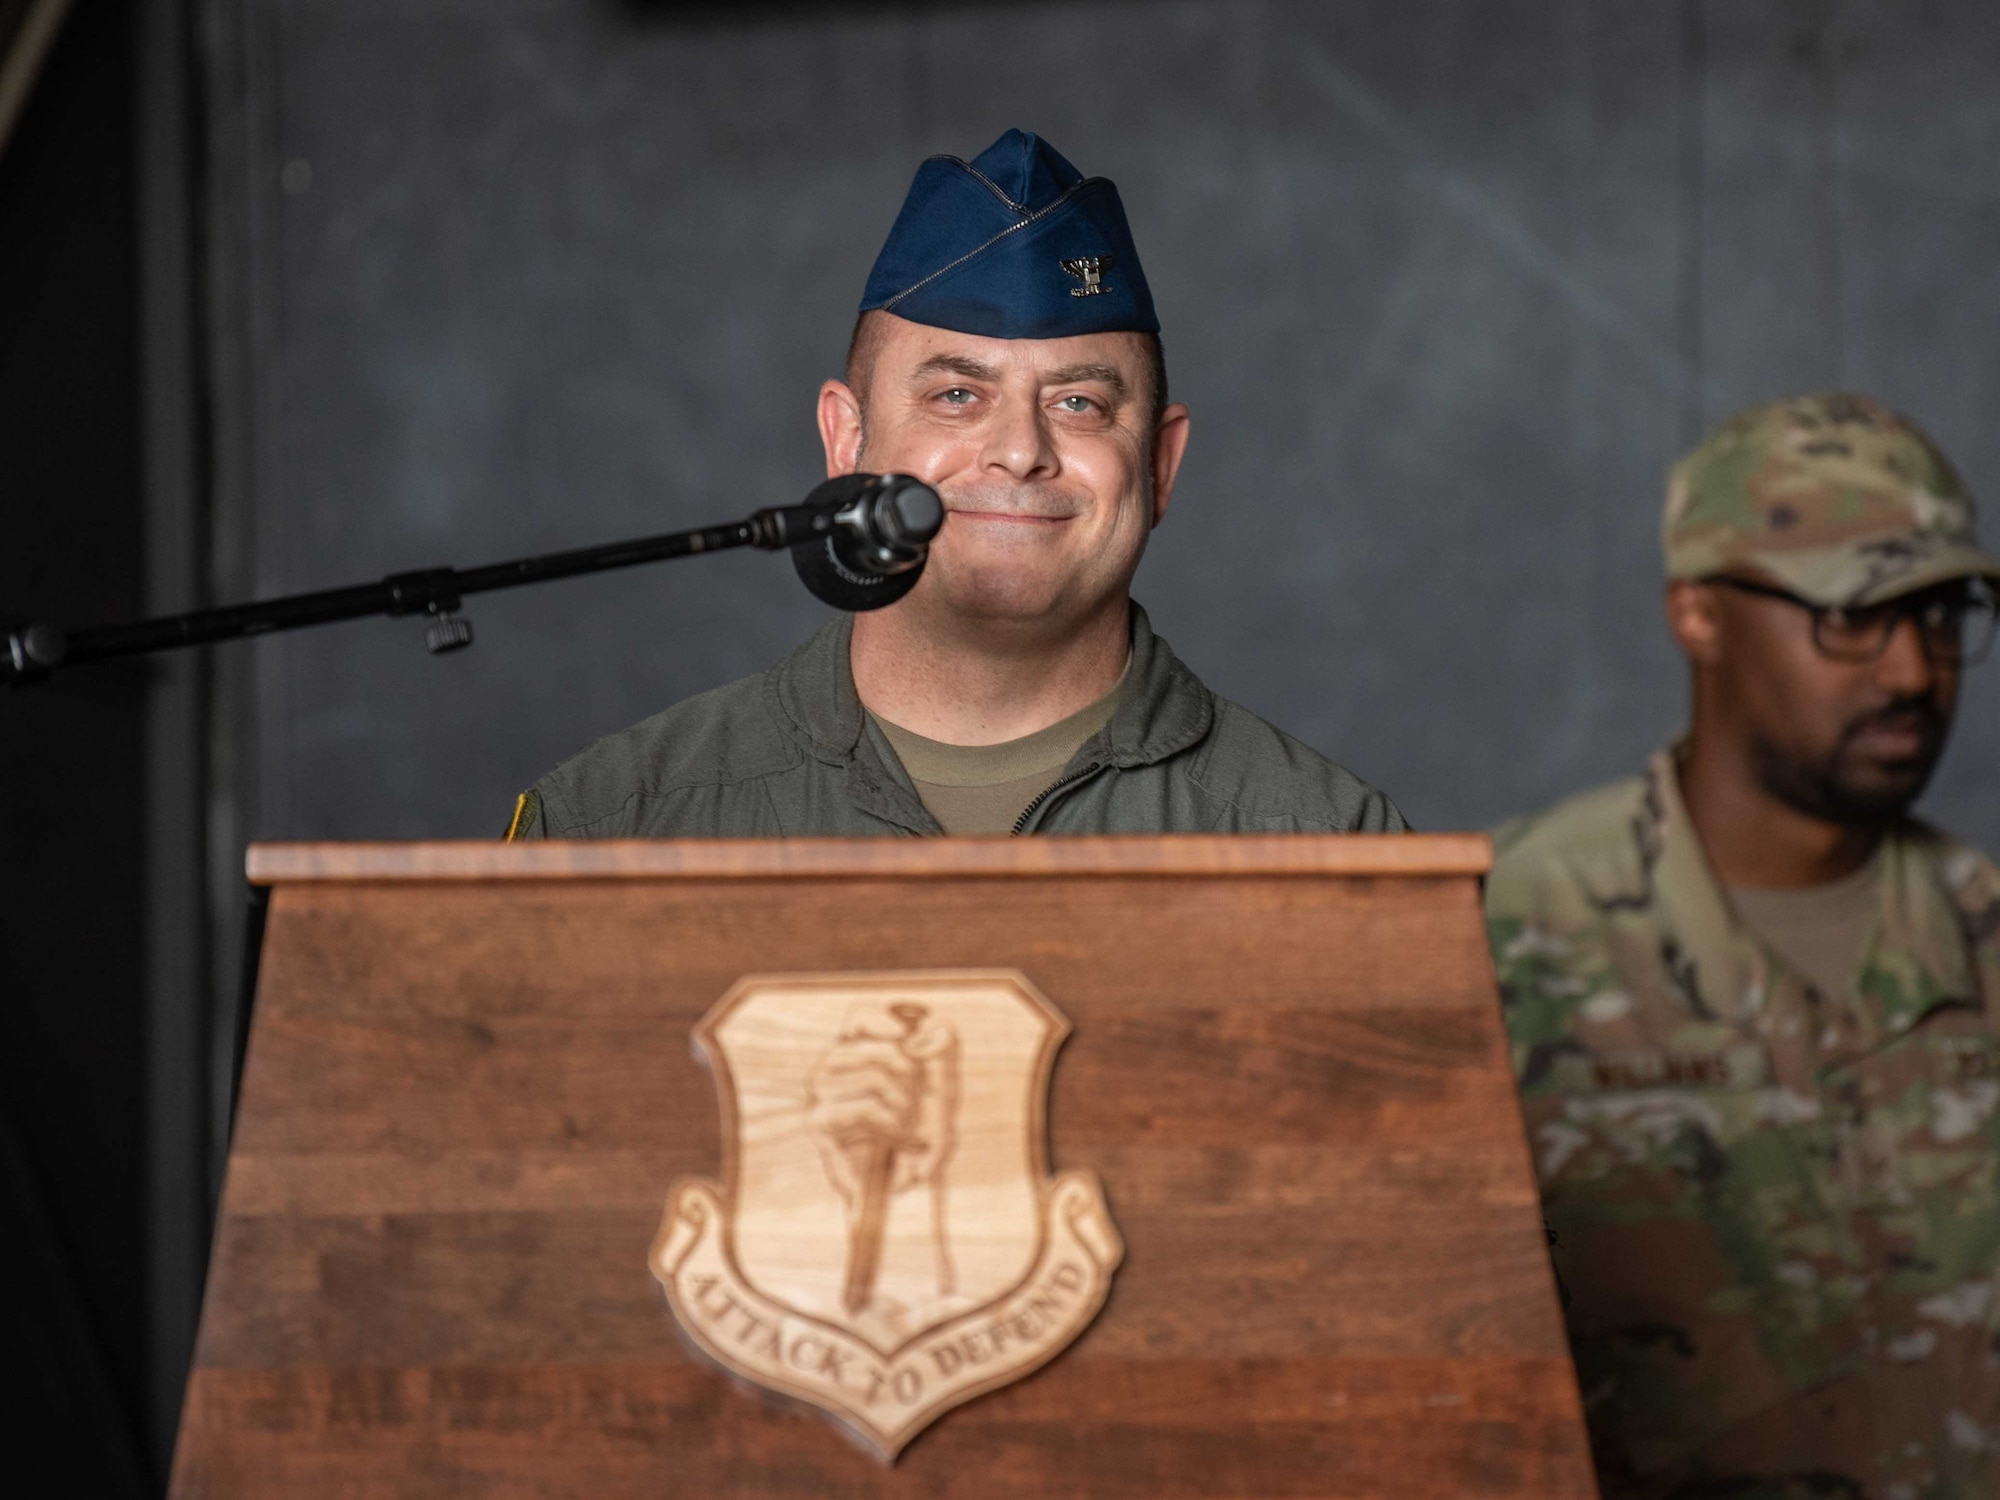 United States Air Force Col. Jesse J. Friedel, 35th Fighter Wing (FW) outgoing commander, smiles as he delivers a speech during the 35th FW change of command ceremony at Misawa Air Base, Japan, June 30, 2022.